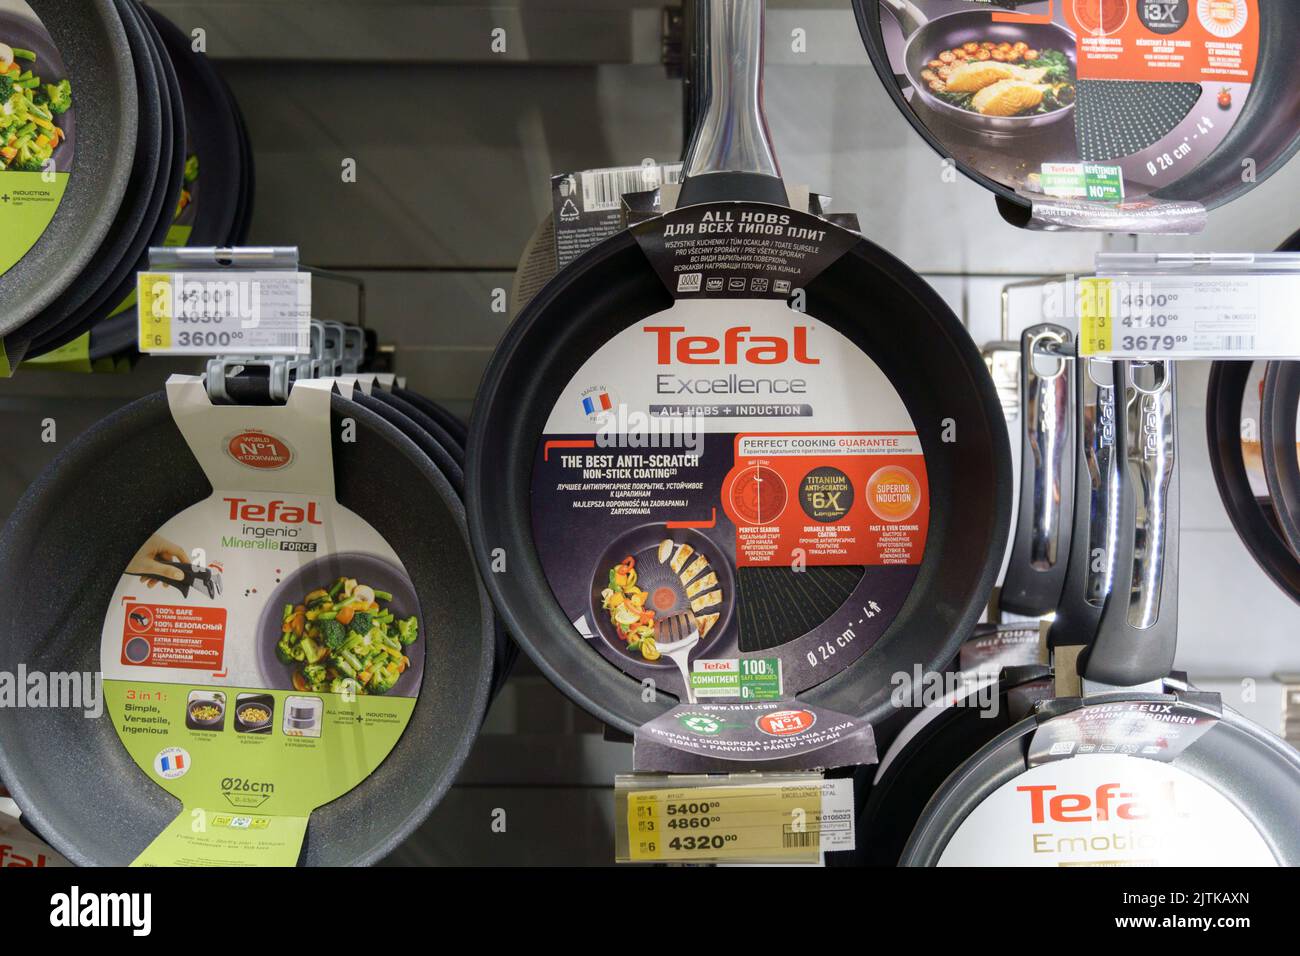 https://c8.alamy.com/comp/2JTKAXN/tyumen-russia-august-17-2022-tefal-and-other-kitchenware-pans-in-store-for-sale-shop-choosing-a-home-product-2JTKAXN.jpg